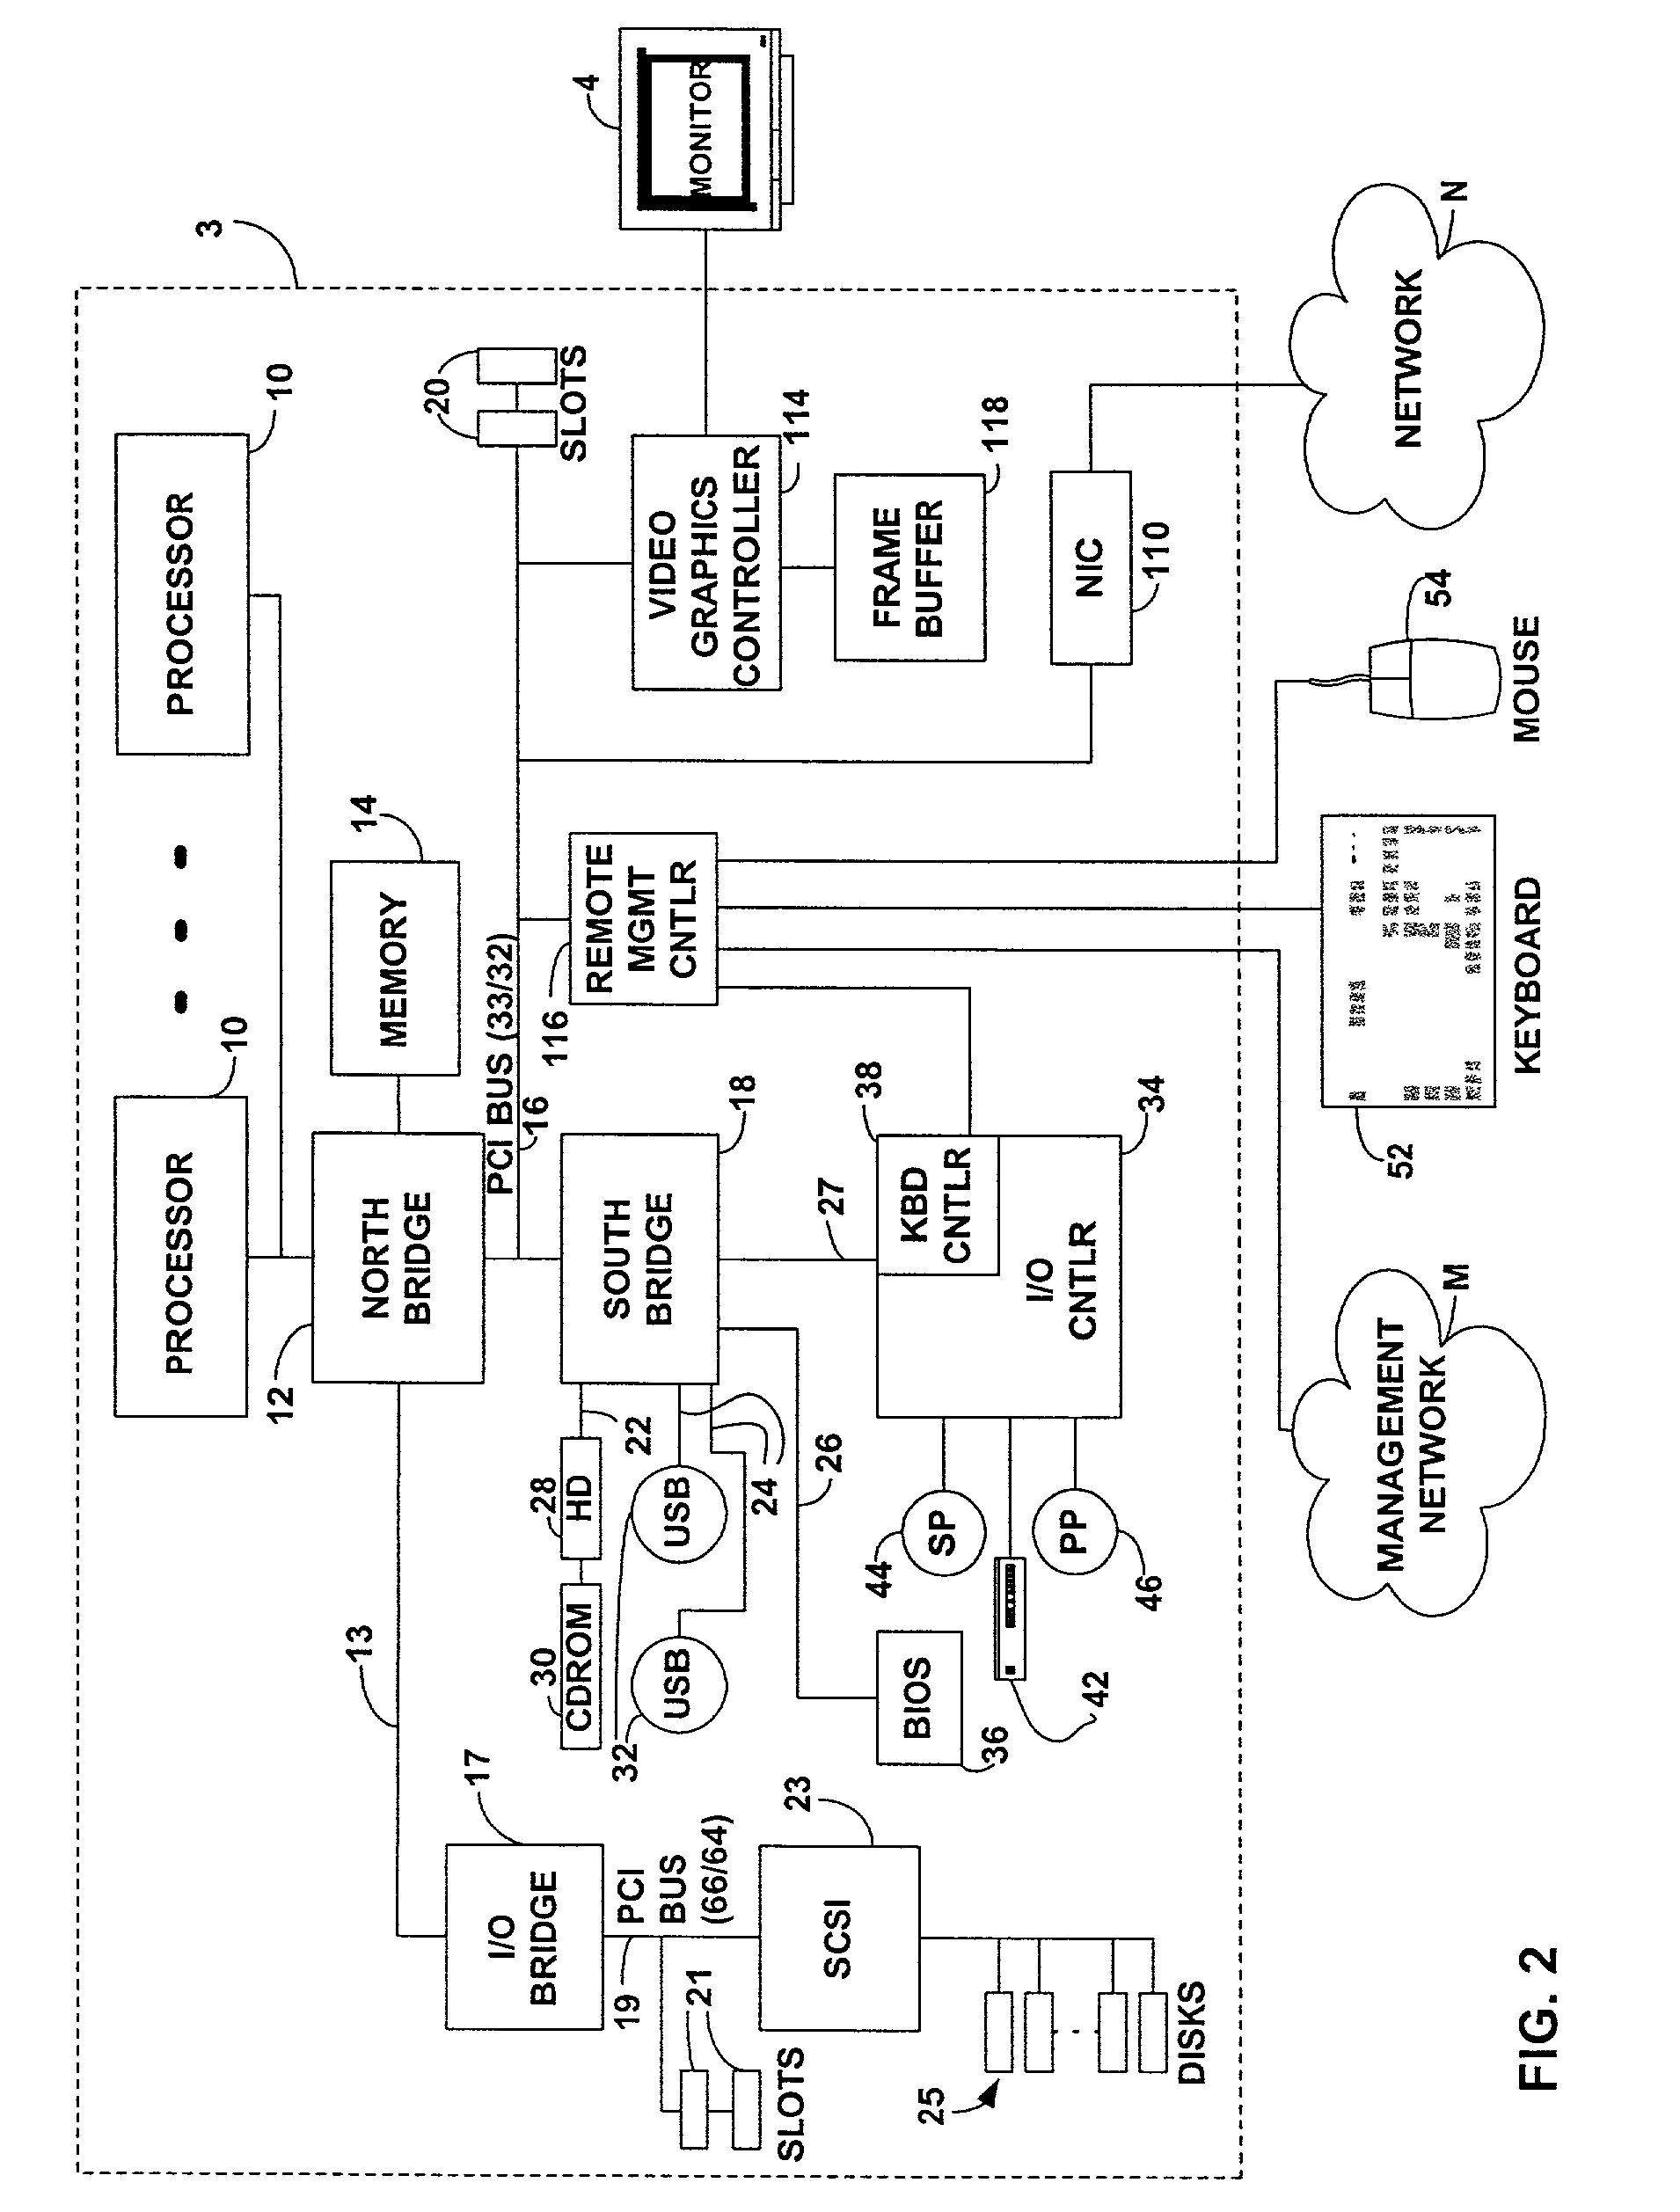 Operating system independent method and apparatus for graphical remote access having improved latency